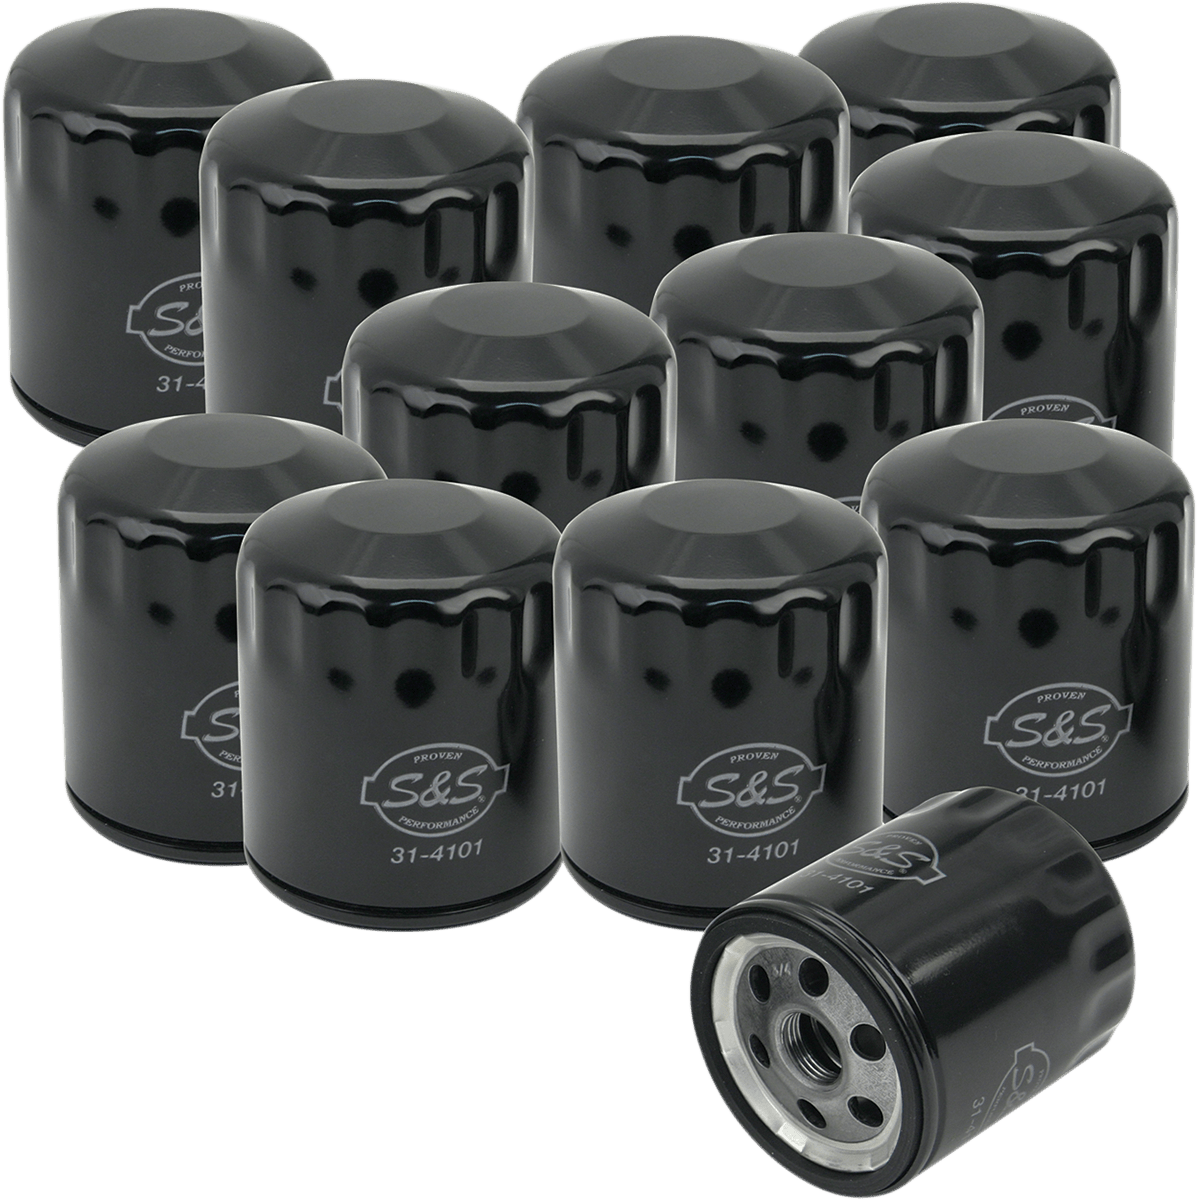 S&S CYCLES-Oil Filters / '84-'23 Models-Oil Filters-MetalCore Harley Supply